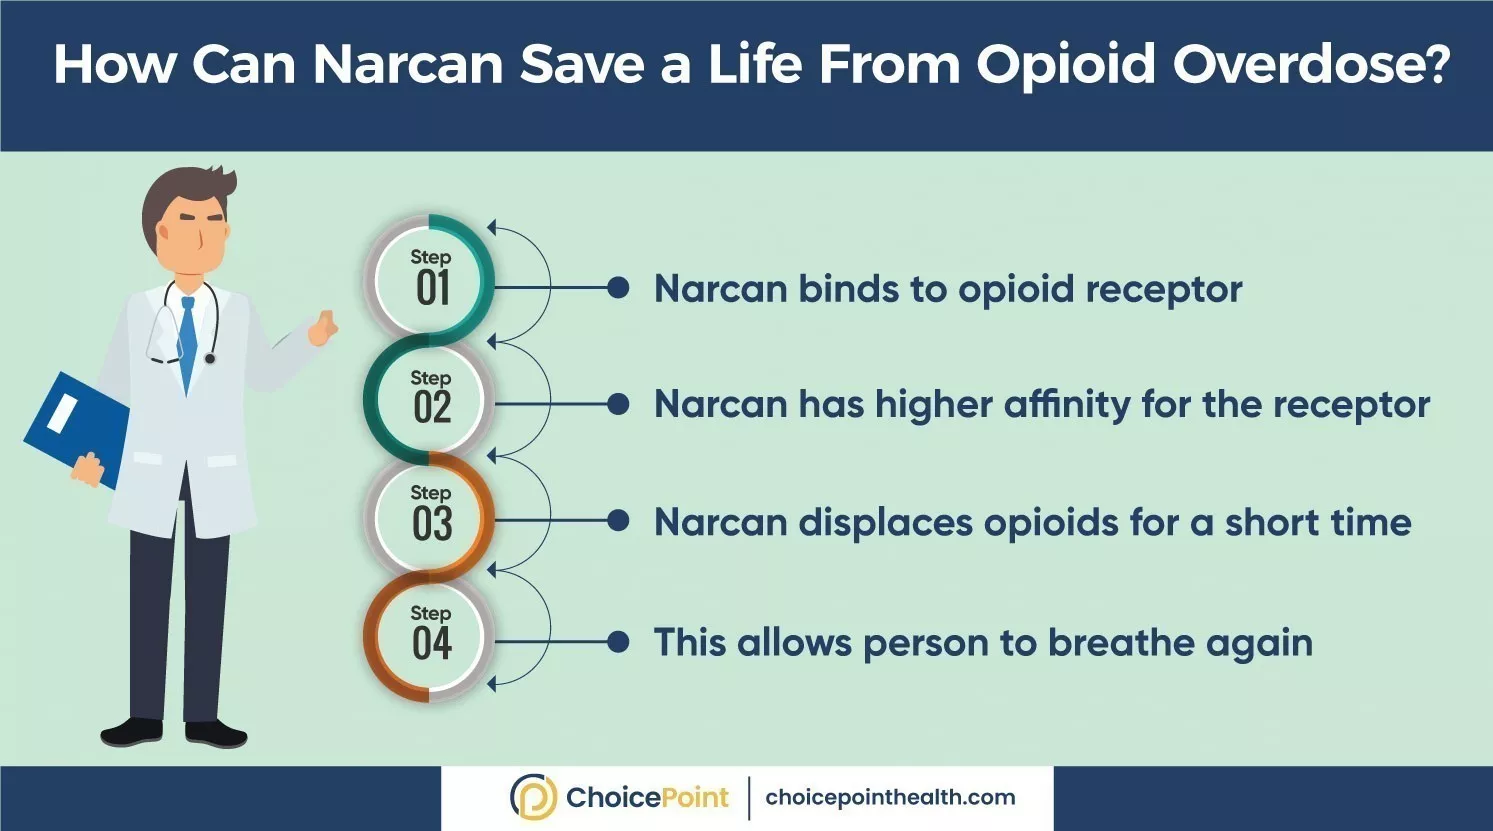 How Does Narcan Save People From Opioid Abuse?